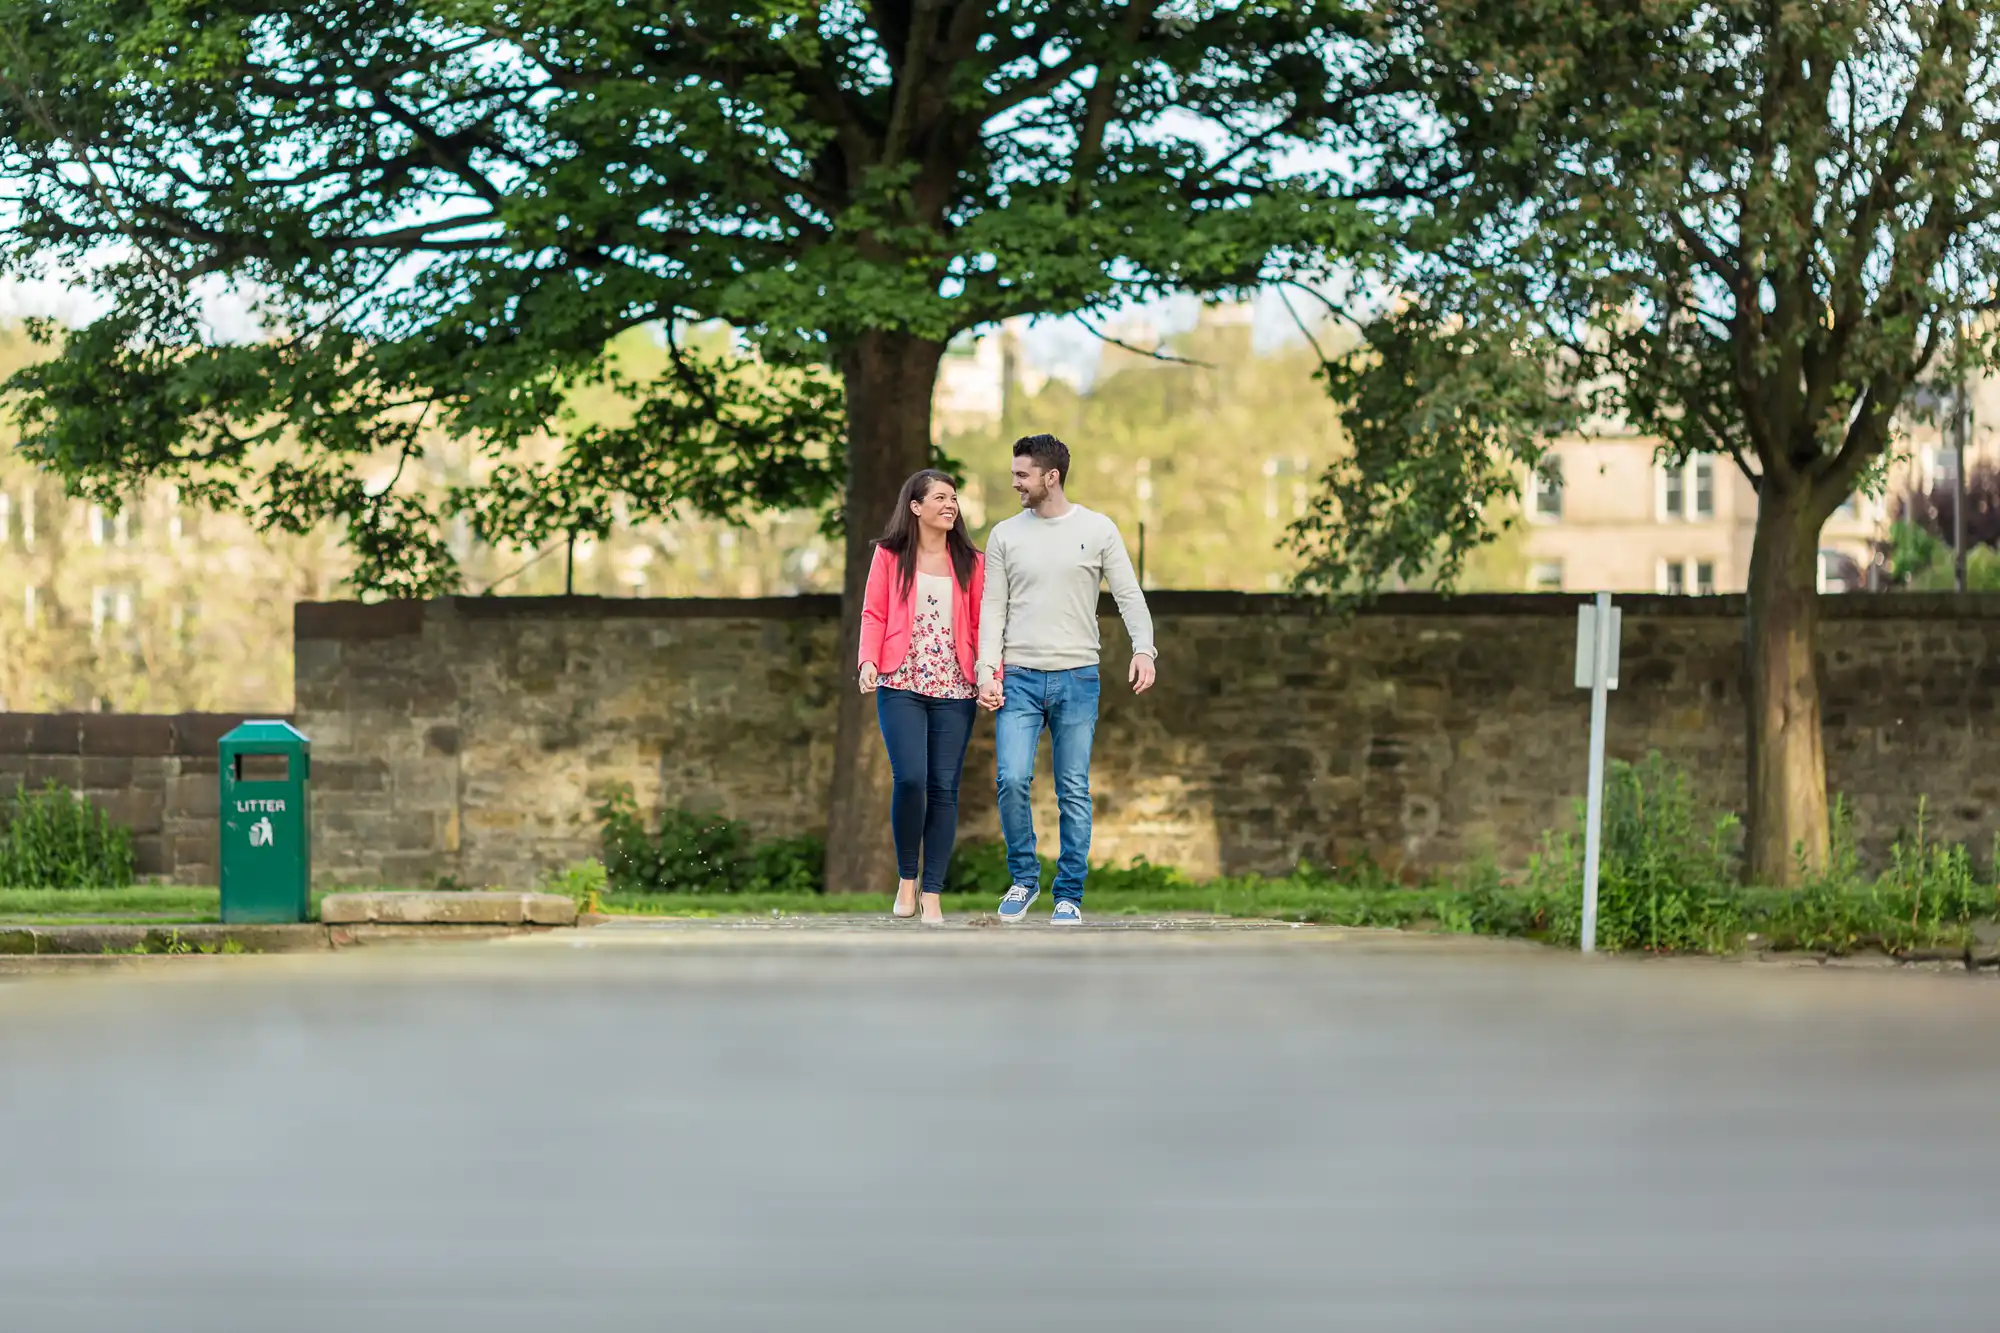 A couple walking hand in hand on a sunny suburban street, smiling and conversing, with trees and a stone wall in the background.